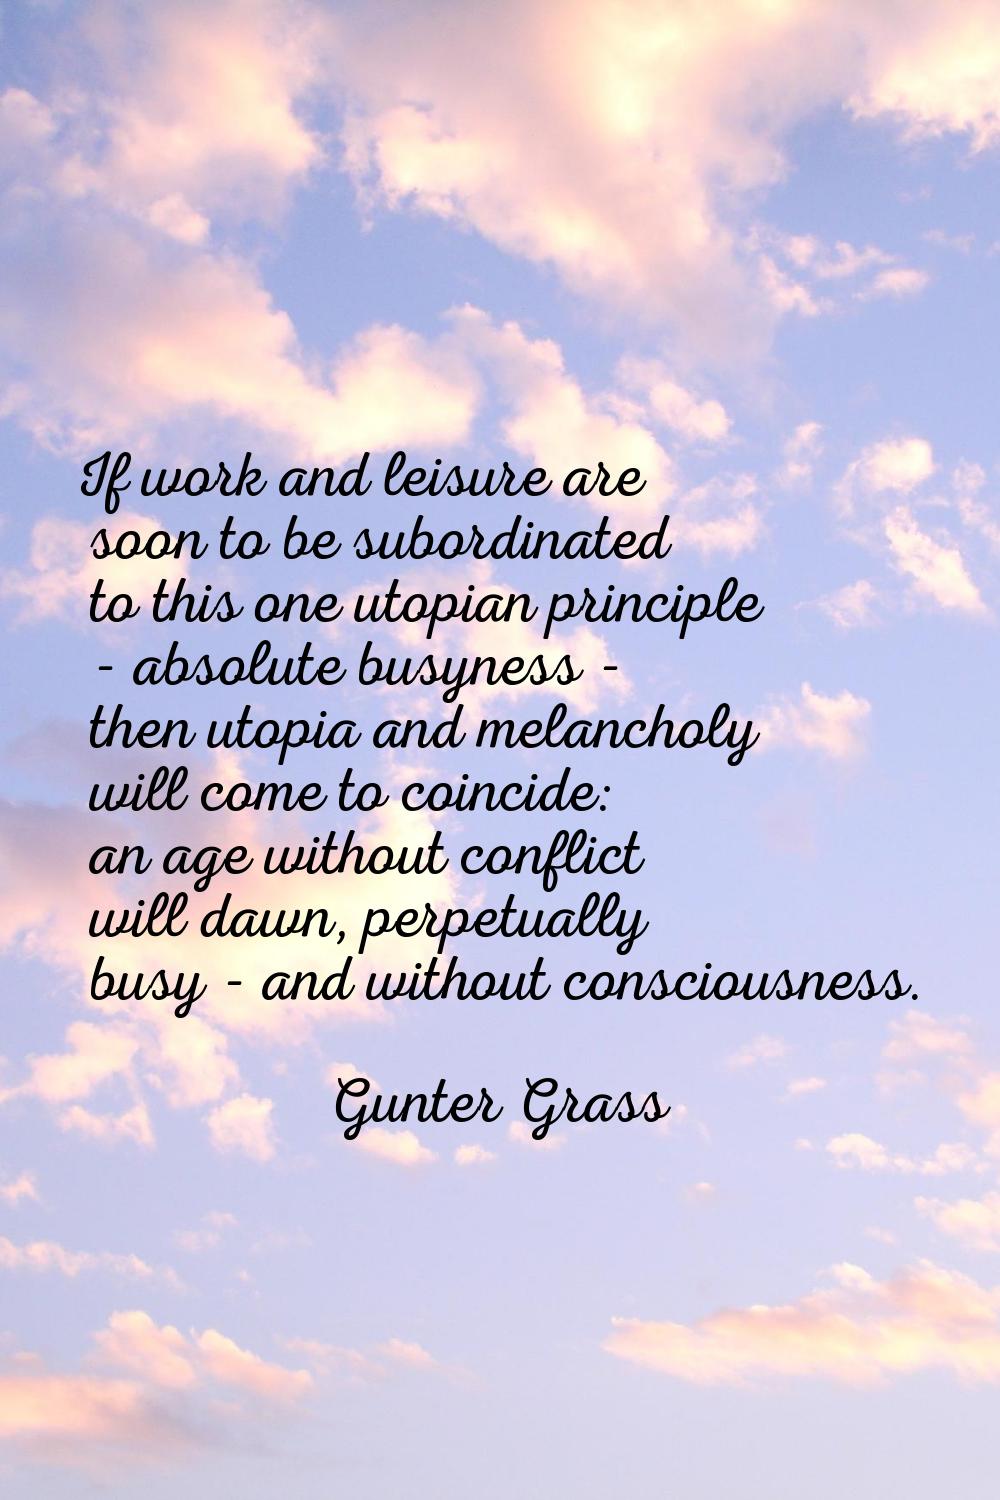 If work and leisure are soon to be subordinated to this one utopian principle - absolute busyness -